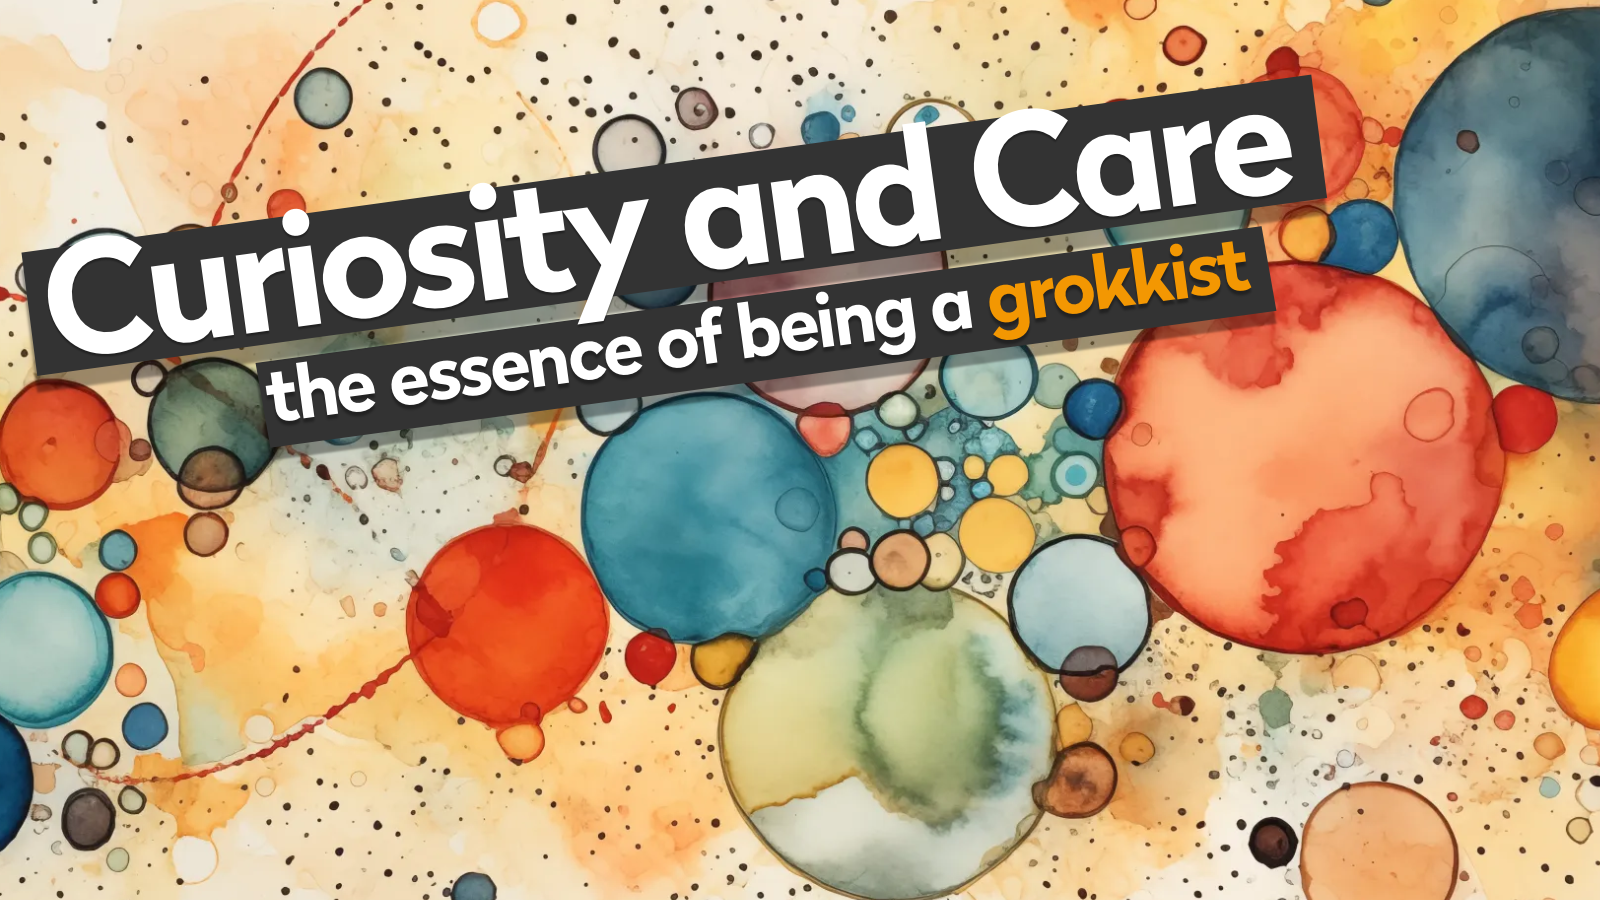 Curiosity and care: the essence of being a grokkist